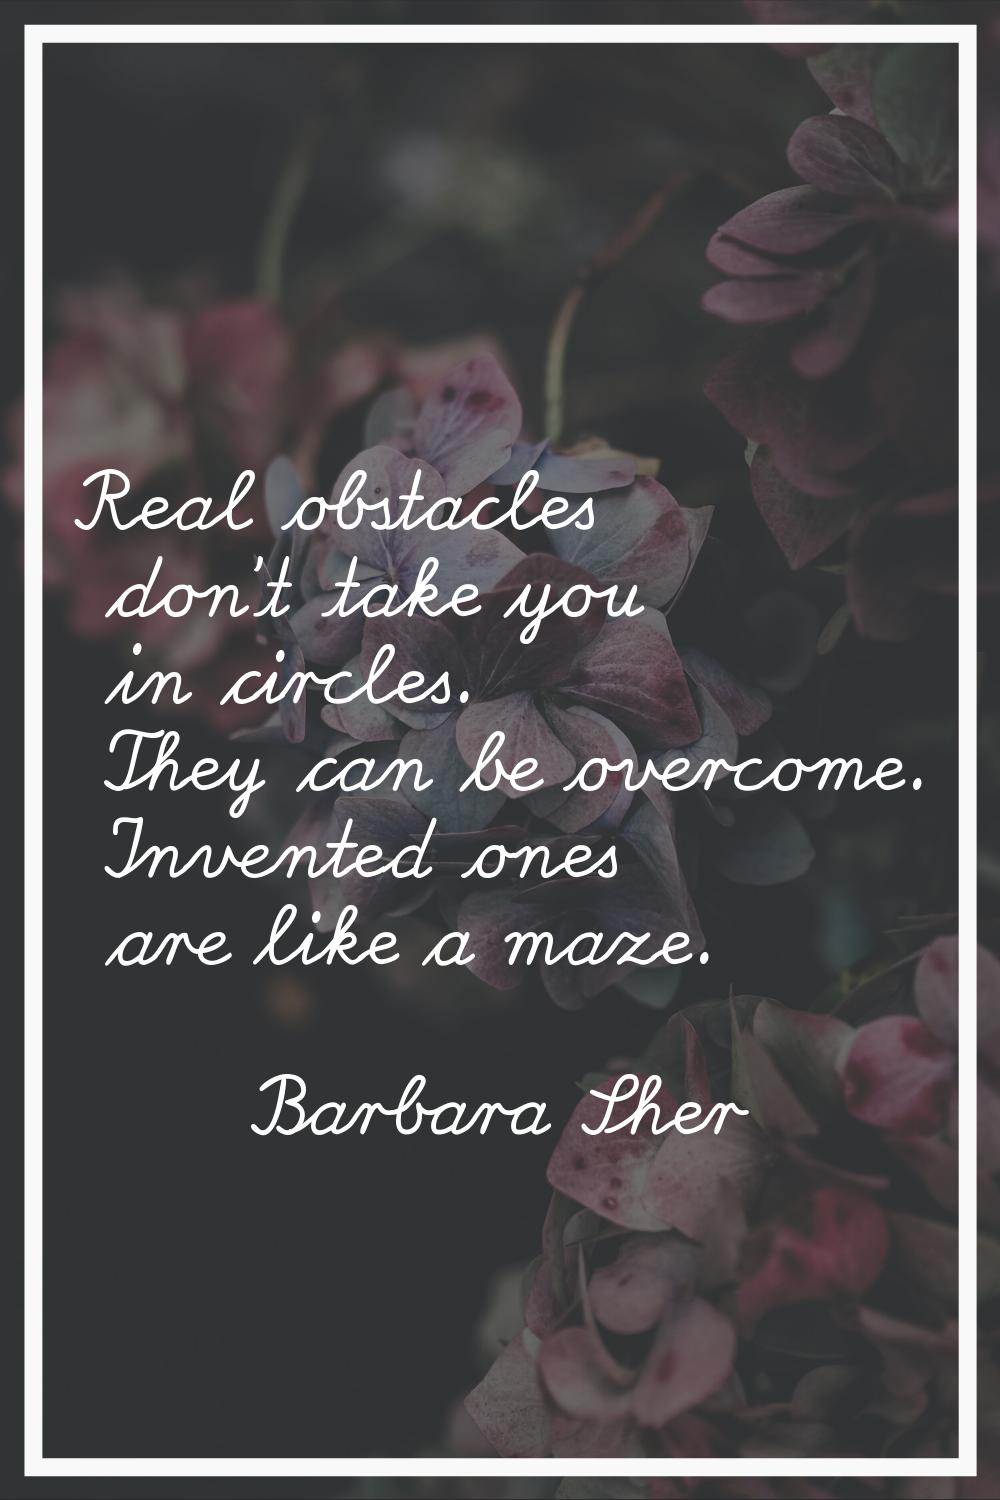 Real obstacles don't take you in circles. They can be overcome. Invented ones are like a maze.